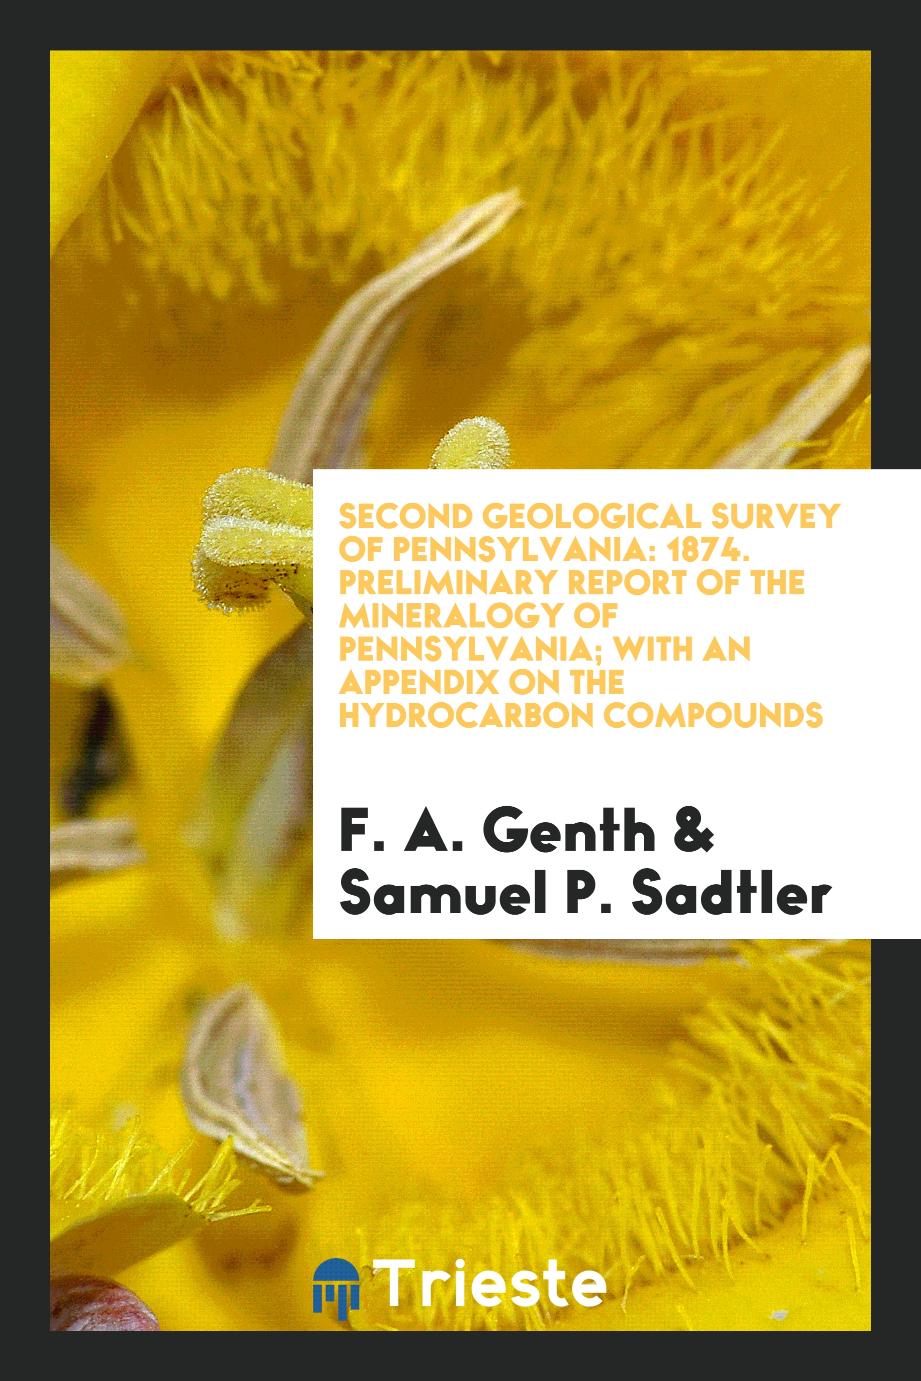 Second Geological Survey of Pennsylvania: 1874. Preliminary Report of the Mineralogy of Pennsylvania; With an Appendix on the Hydrocarbon Compounds